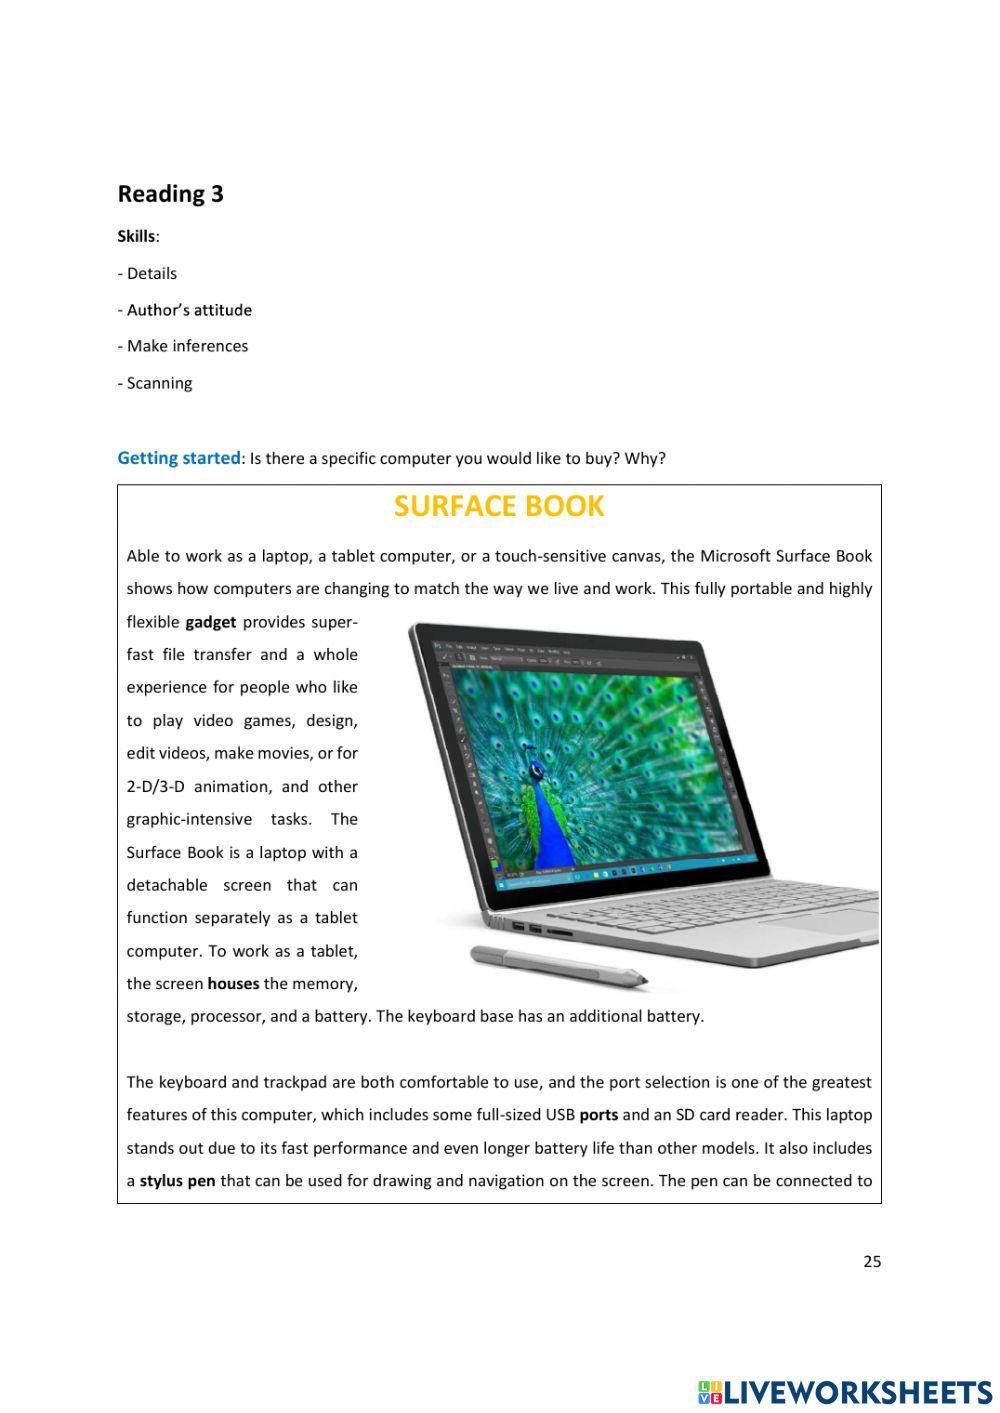 Unit 3 Reading 3 Surface book